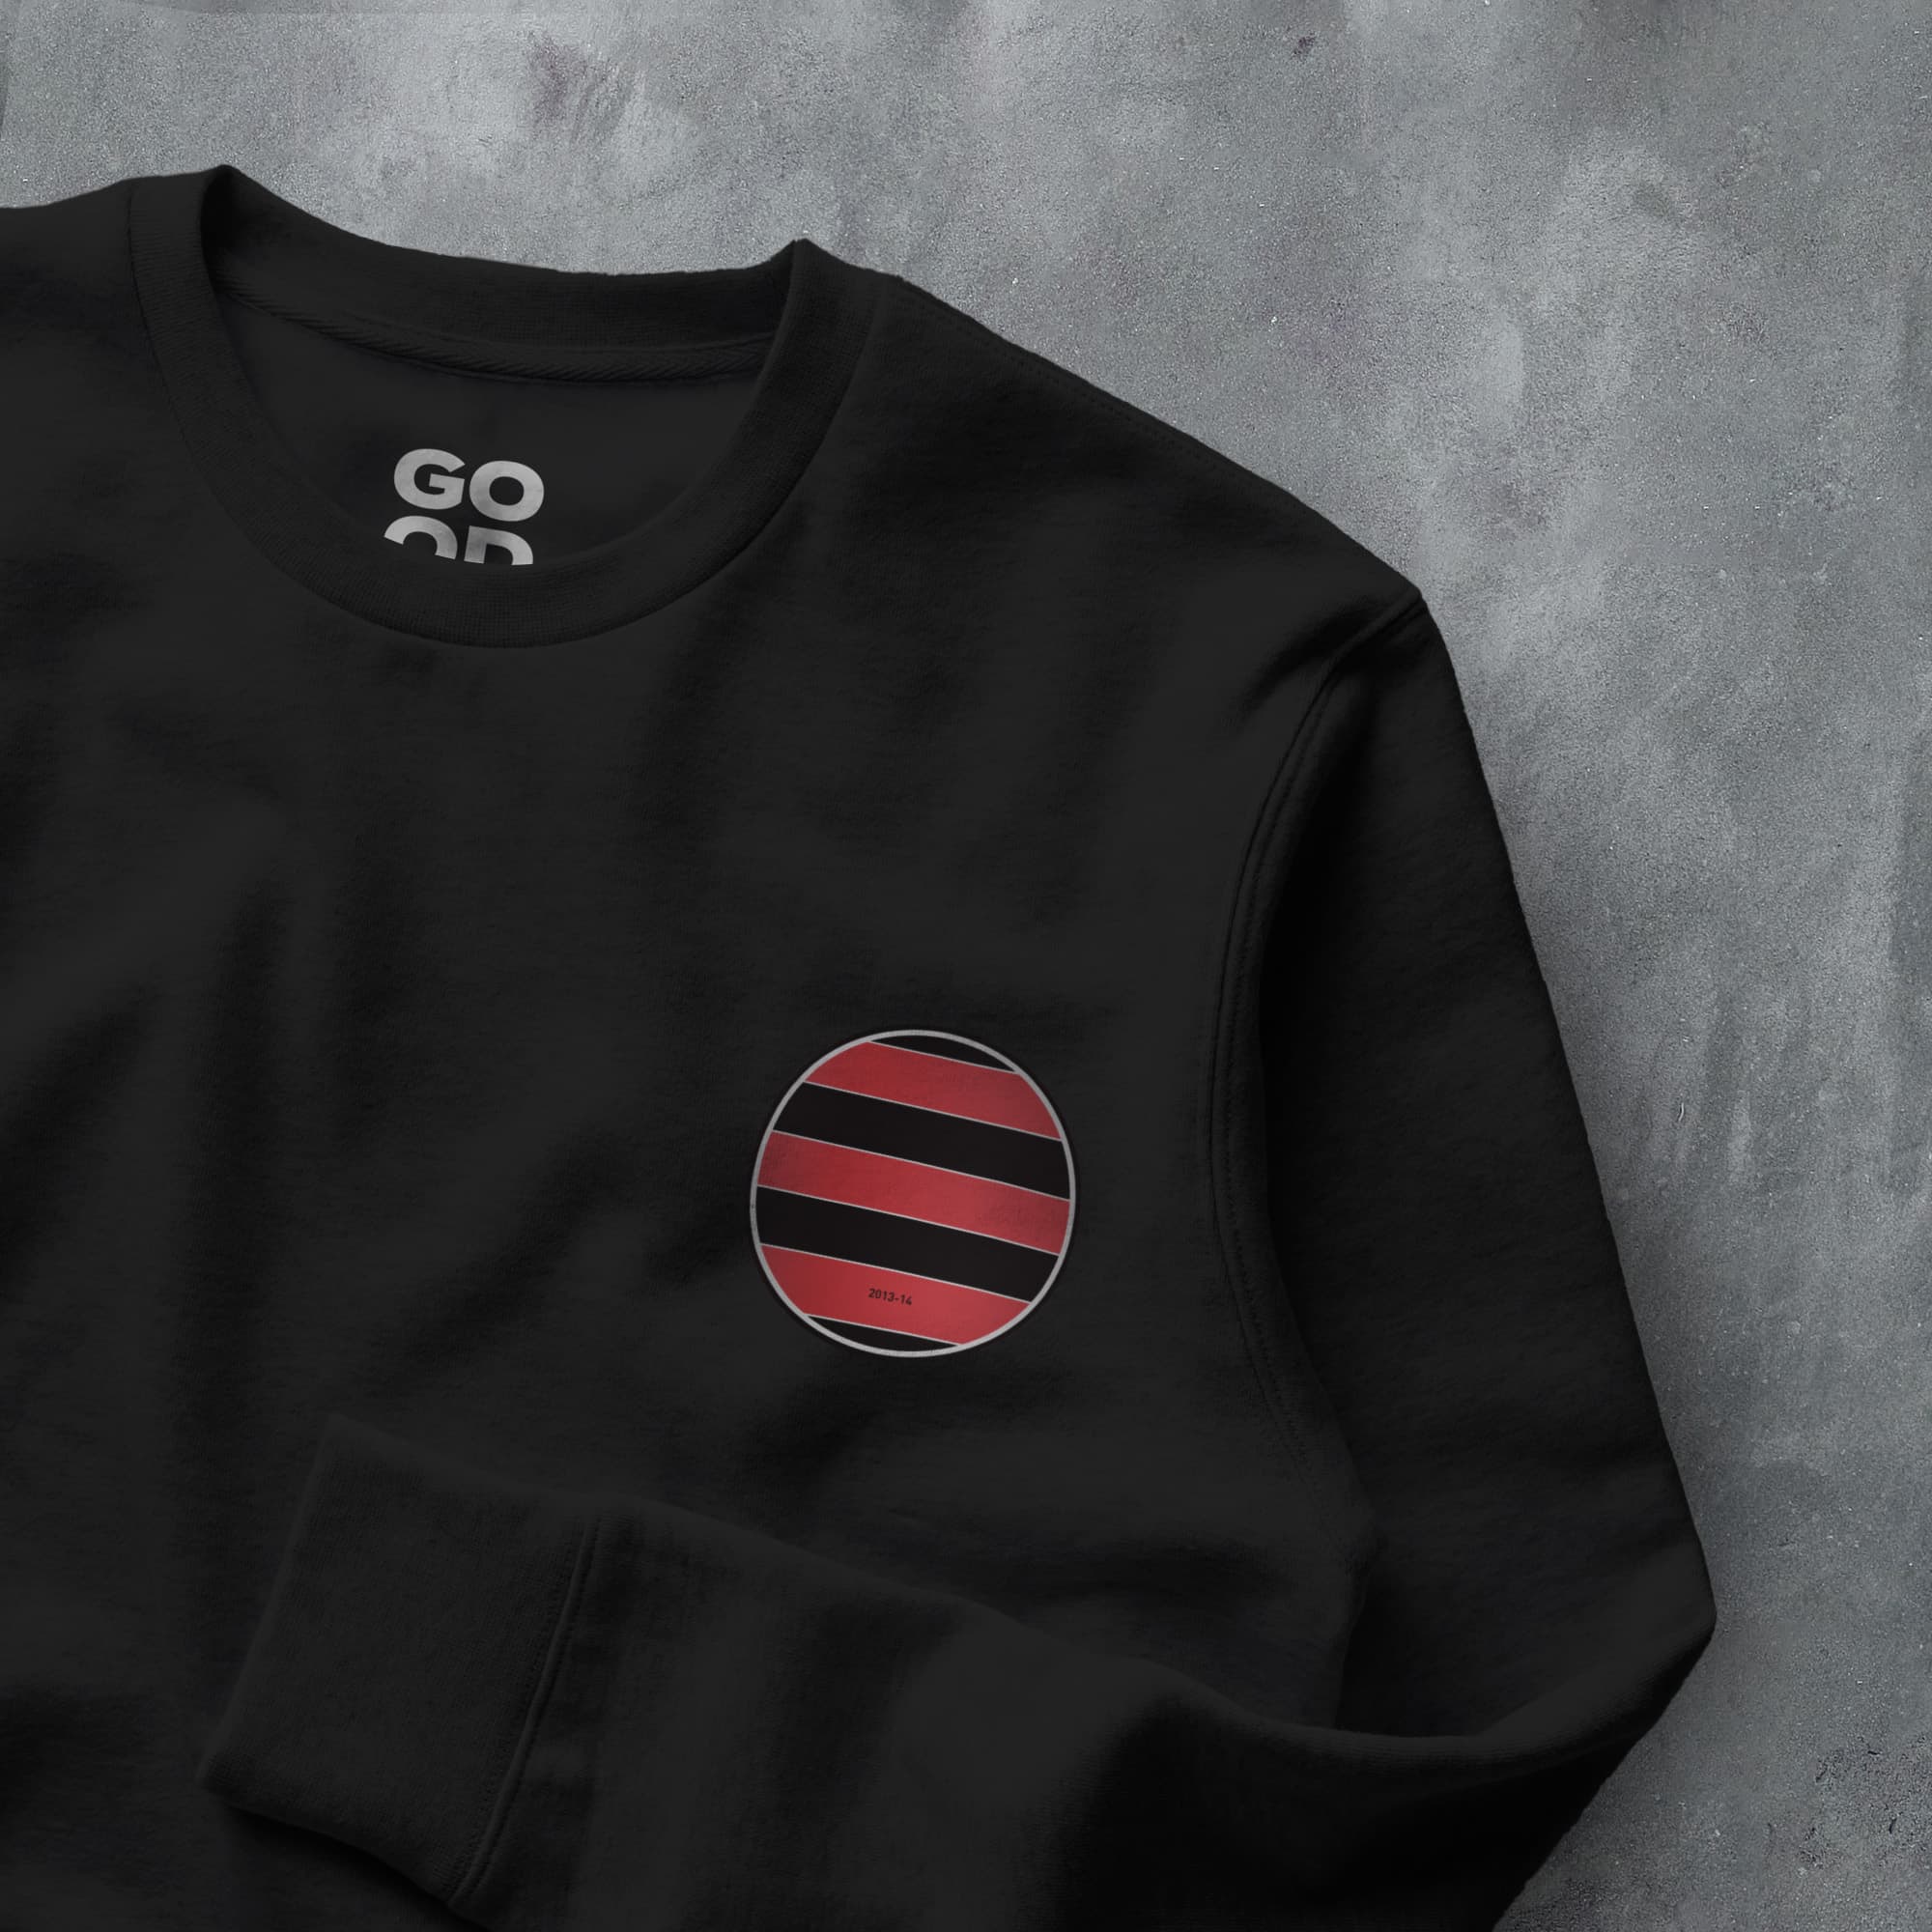 a black sweatshirt with a red and black circle on it